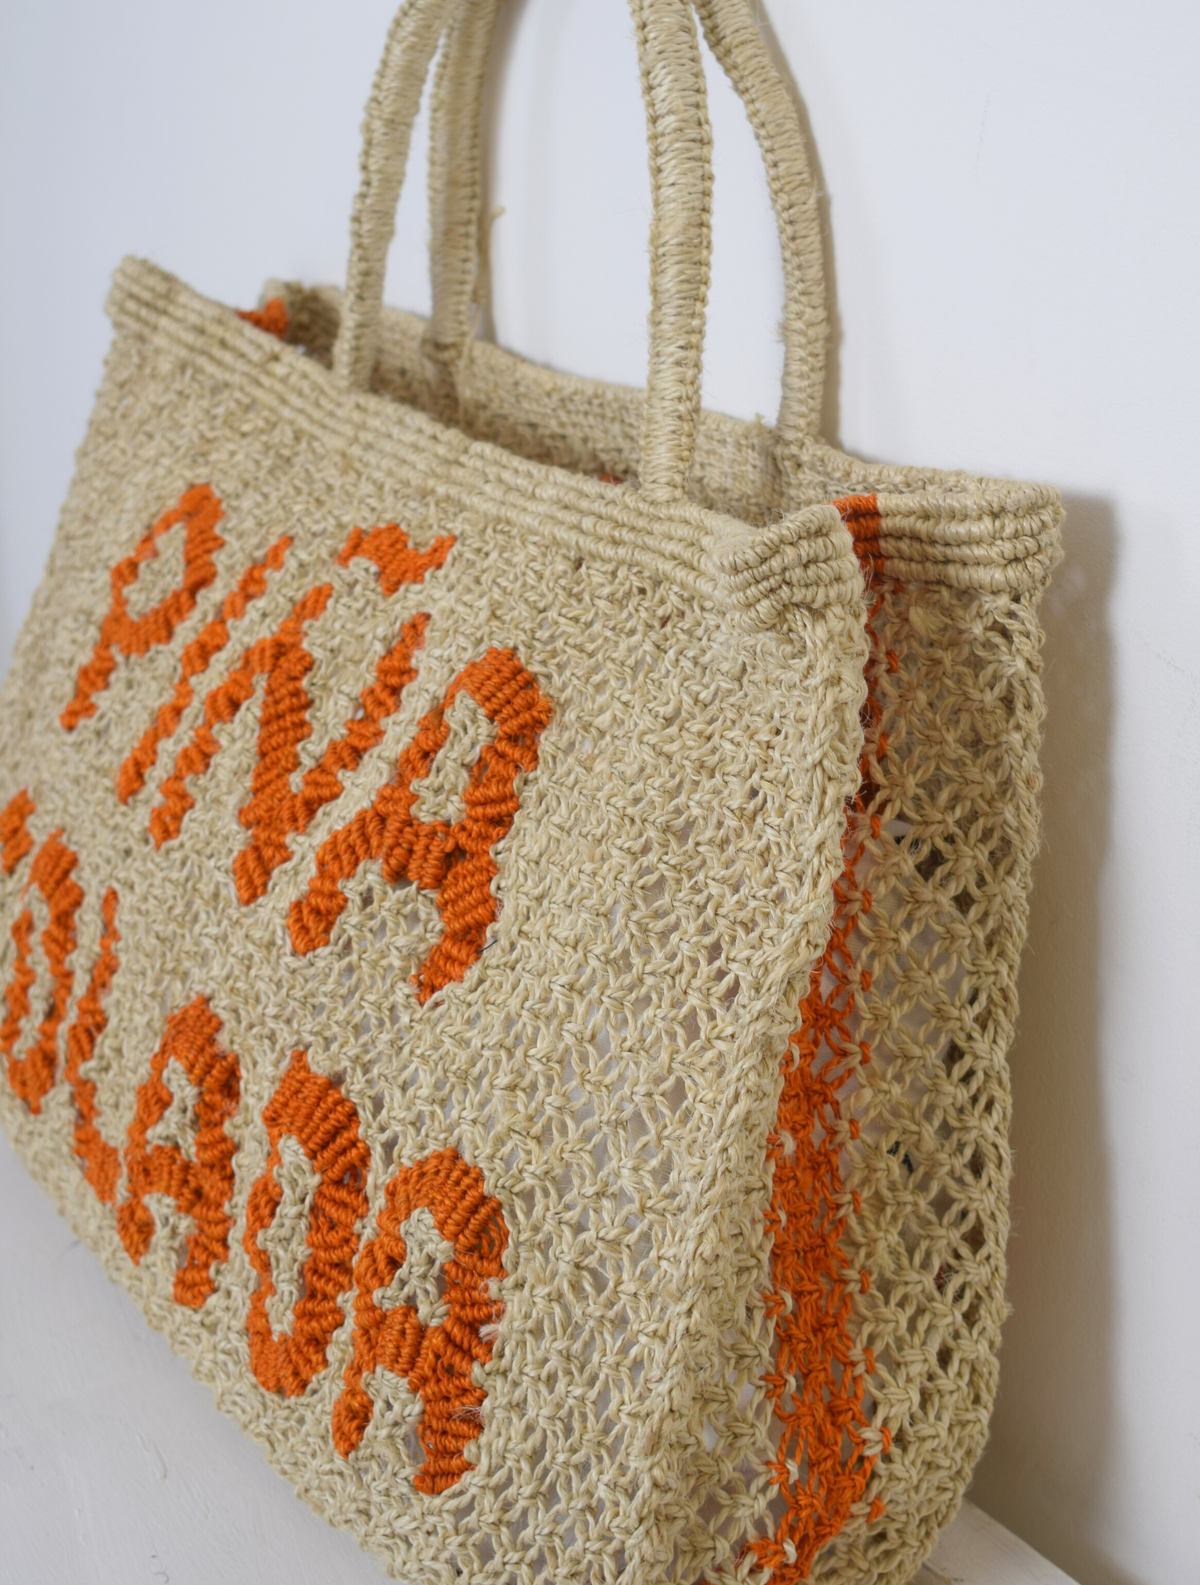 Woven nautral bag with pina colada writen on it in orange